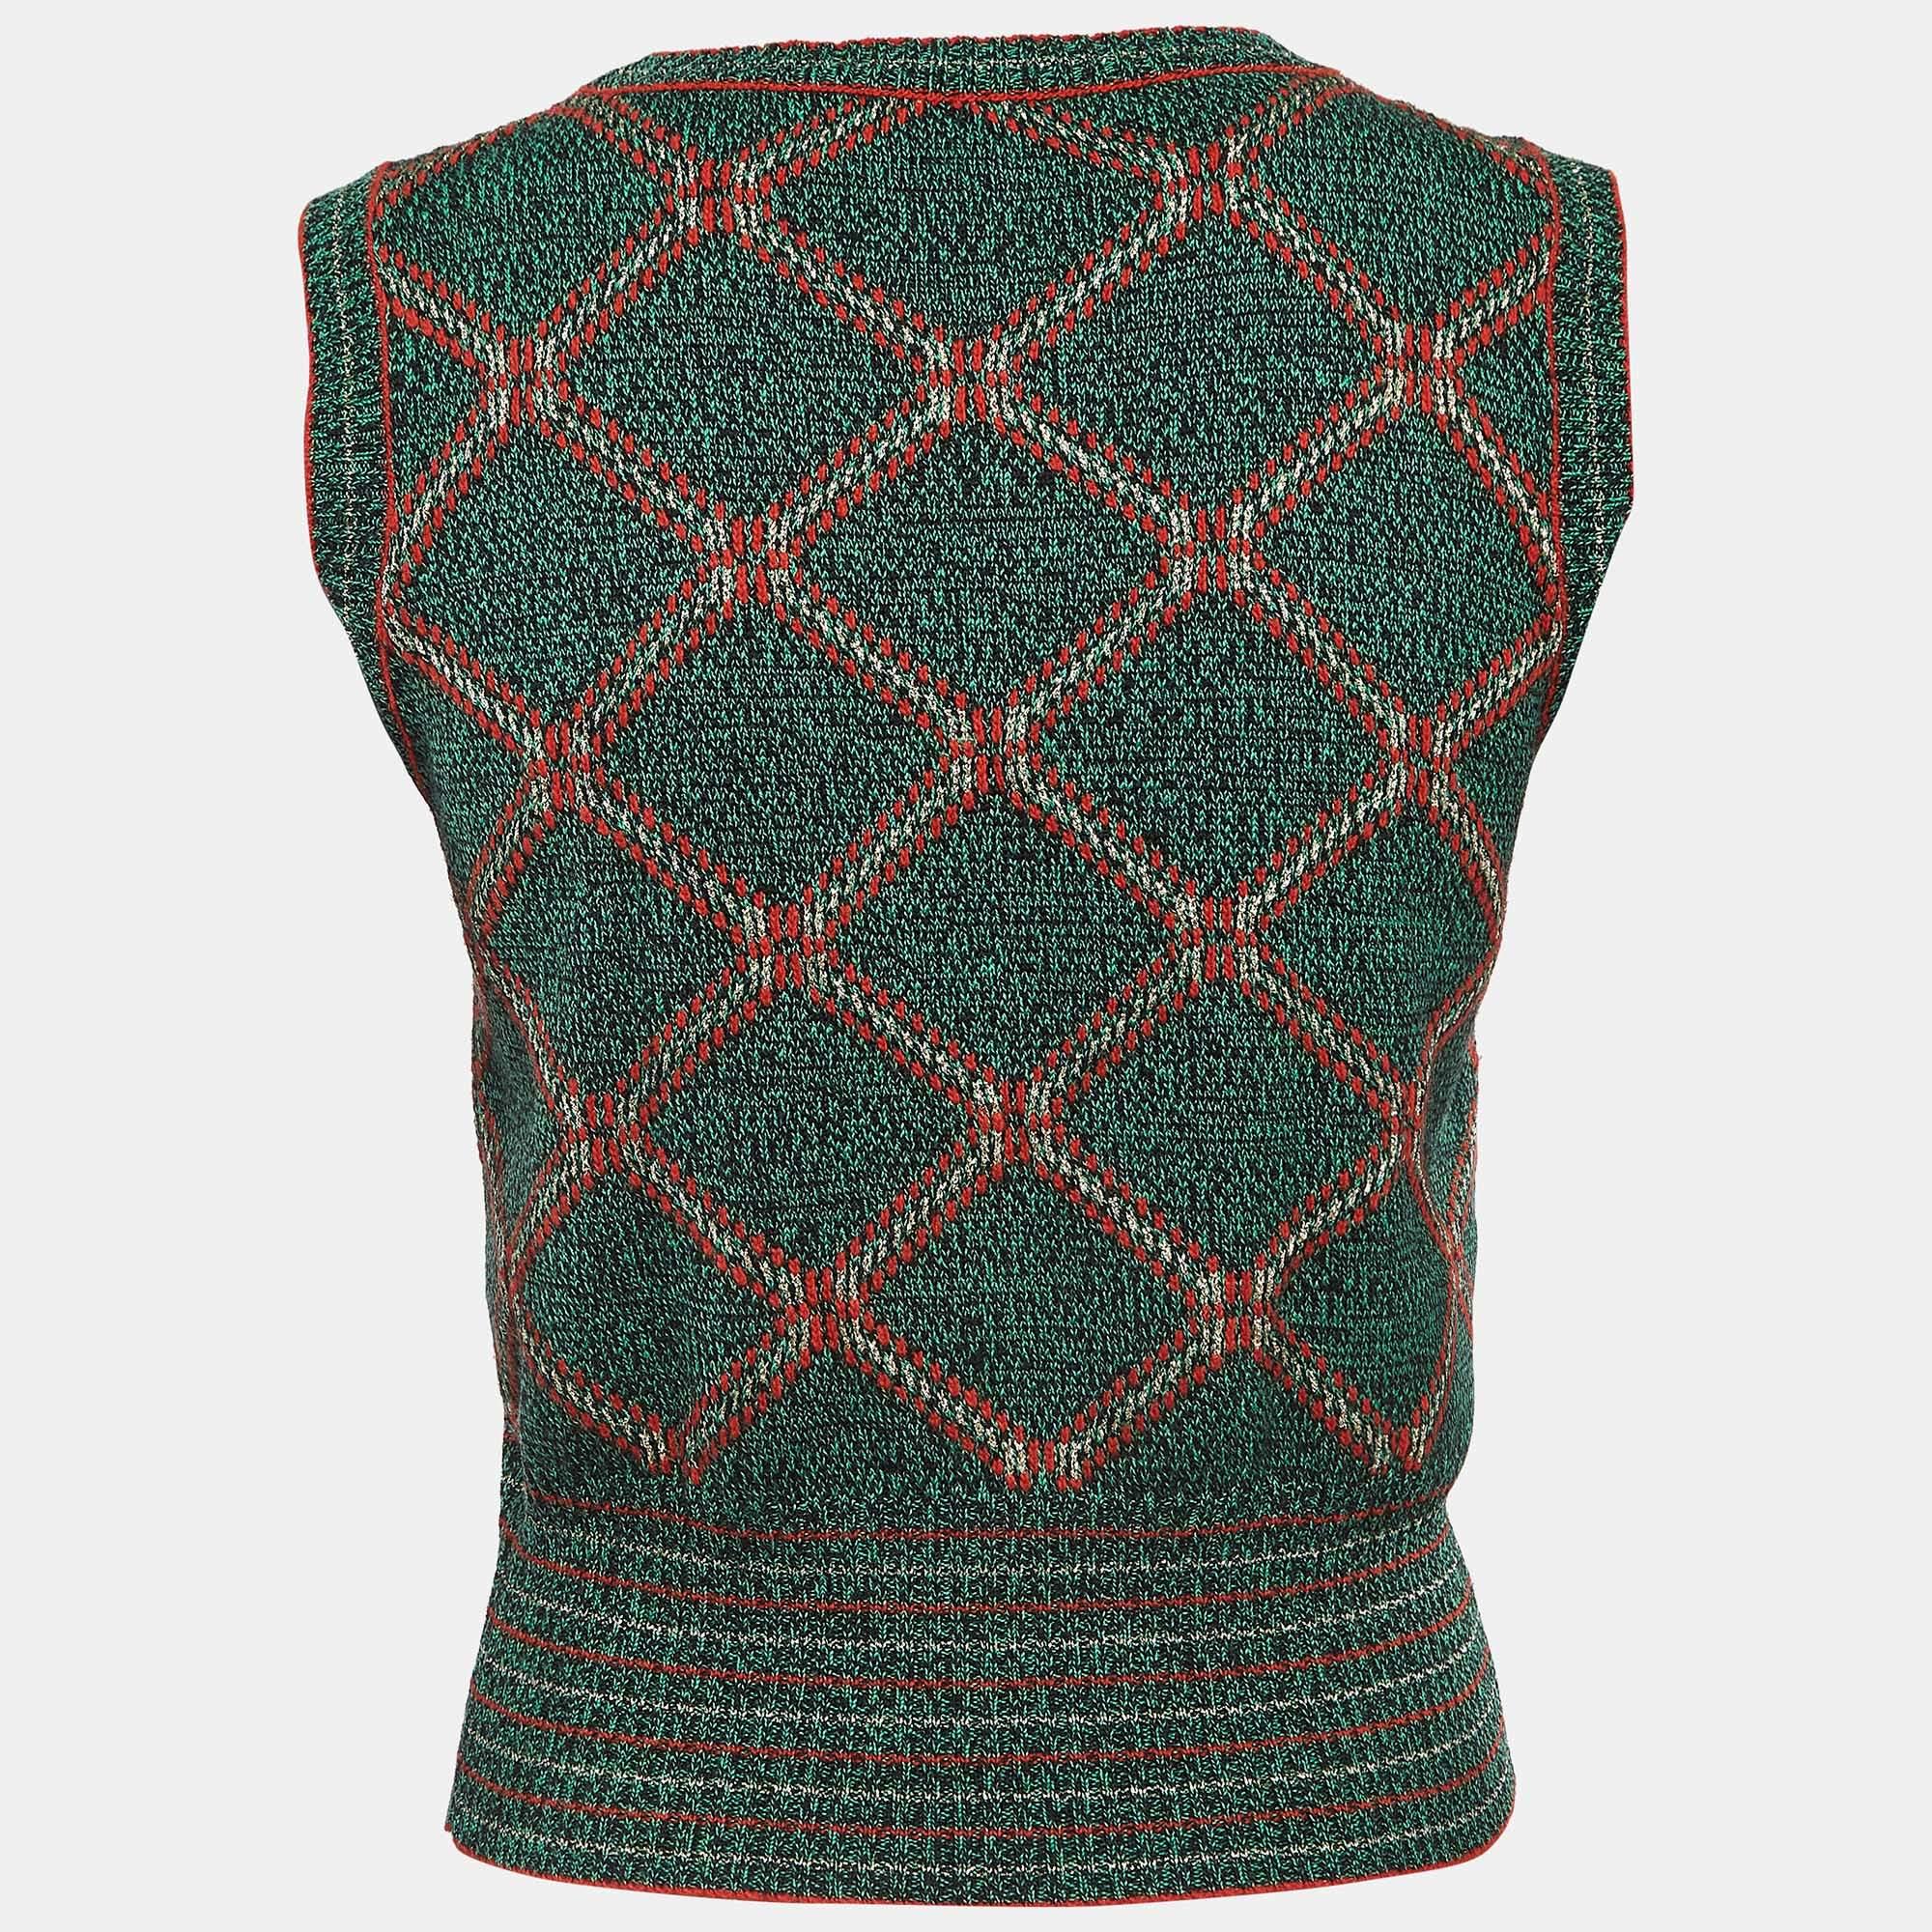 Wrap yourself in the luxurious warmth of the Gucci vest. Crafted with precision from a lush wool blend, this vest features intricate embroidery detailing, adding a touch of artisanal charm. Perfect for layering, it effortlessly merges style with